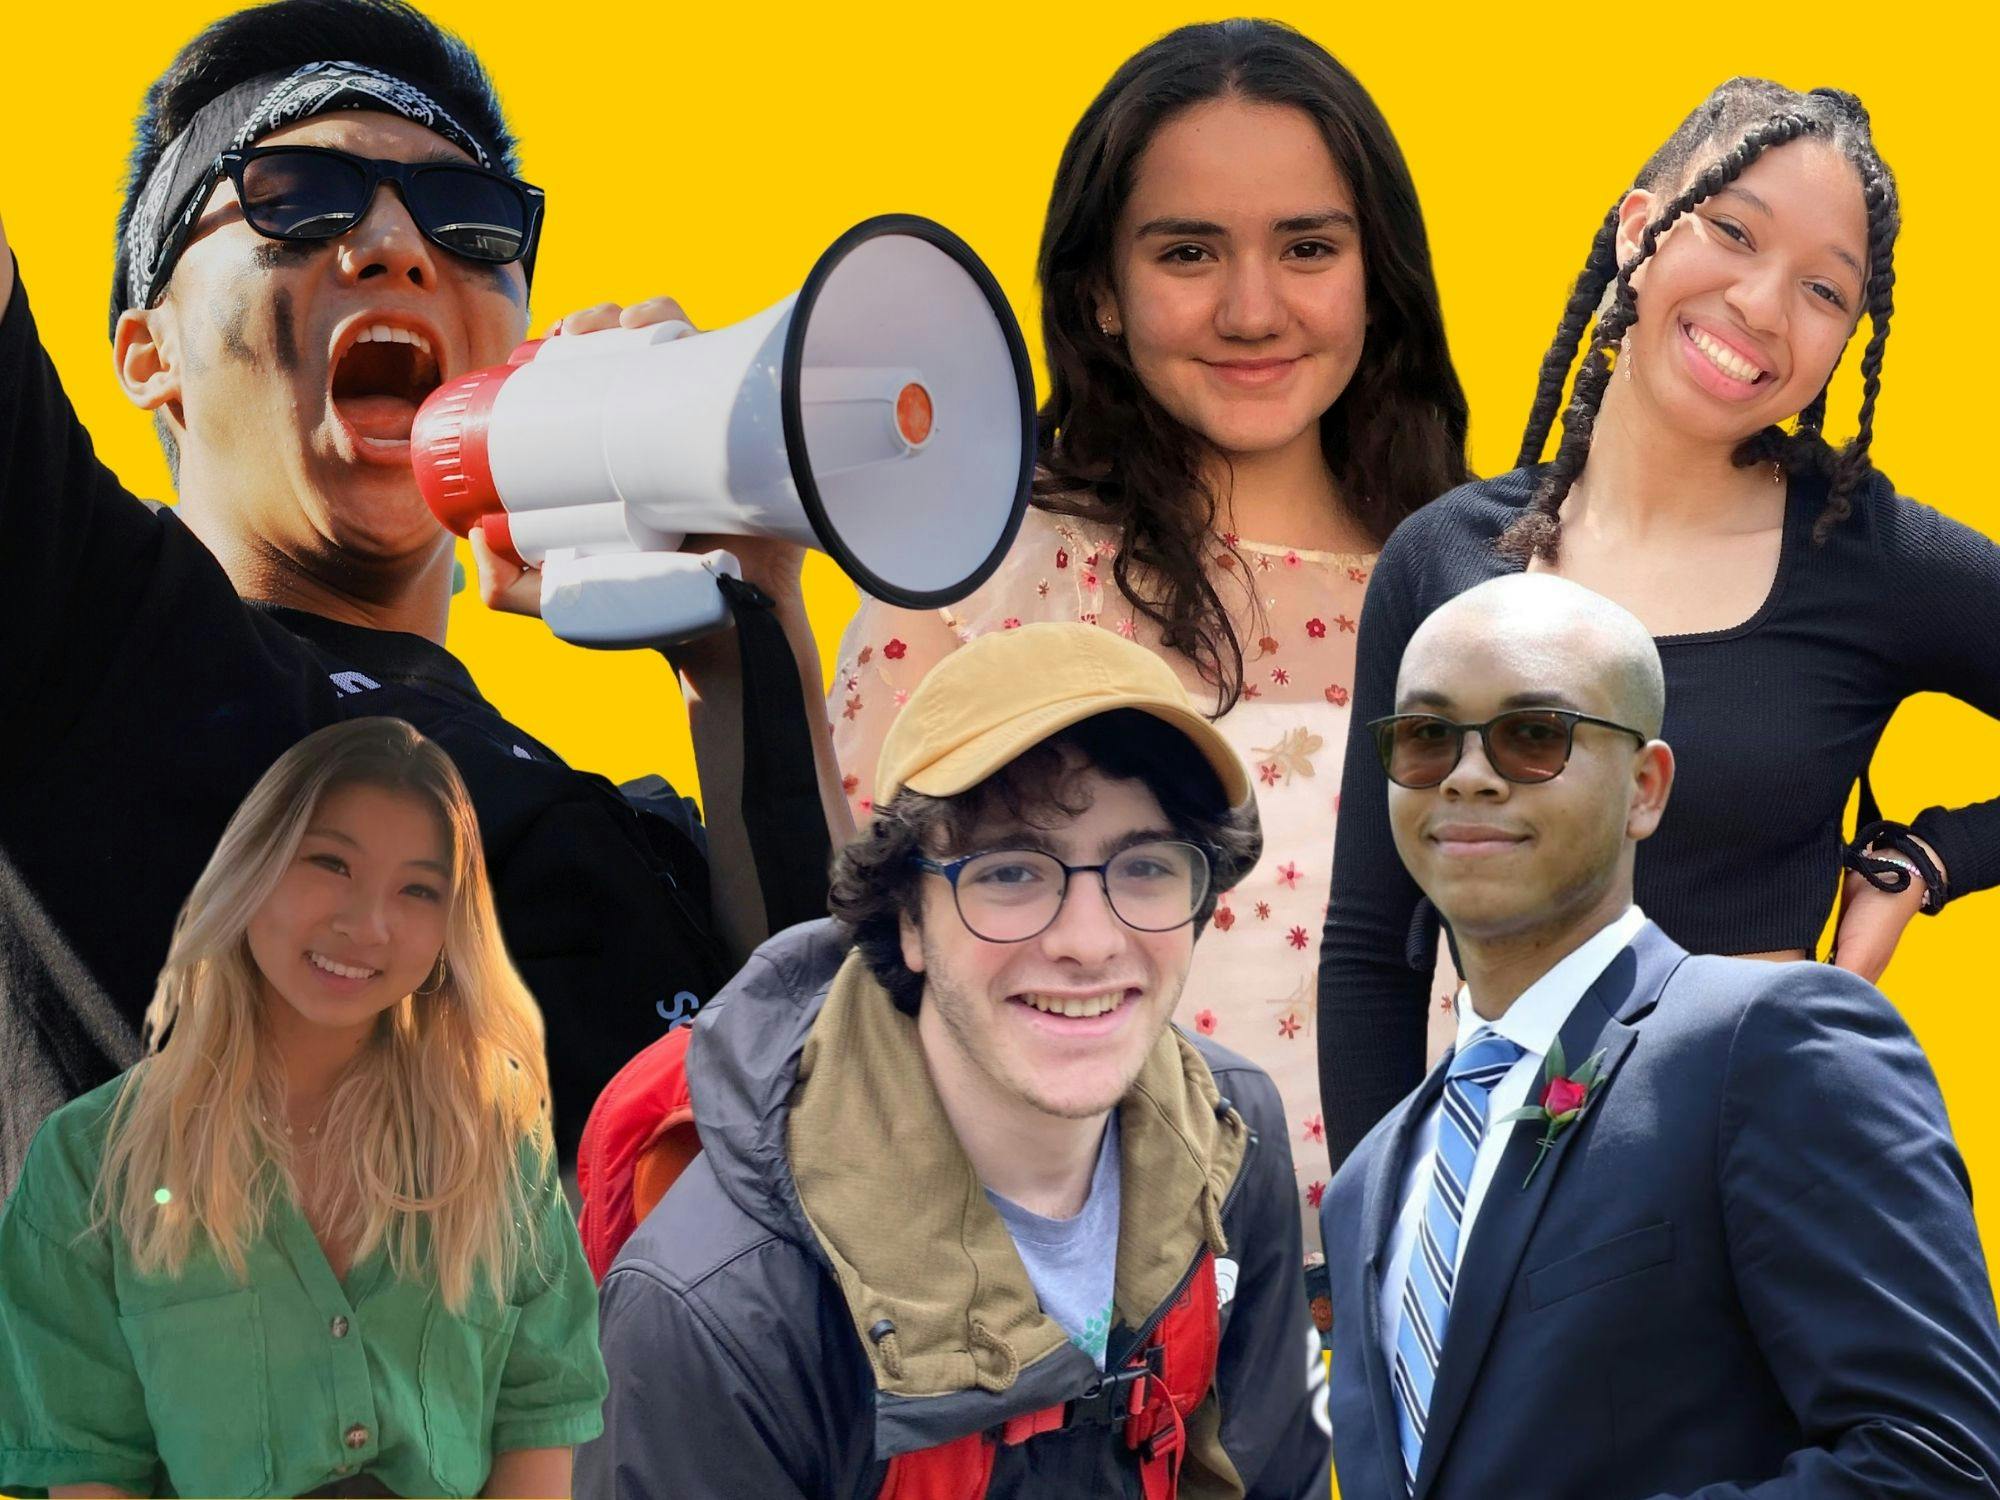 Six young people on a yellow background. From left to right: a man in sunglasses yelling into a megaphone; a woman smiling wearing floral blouse; woman with long braids, tilted head smiling wide; woman with blonde hair and green top; male with glasses, beige cap, and rain jacket; bald male with sunglasses, blue suit and striped tie